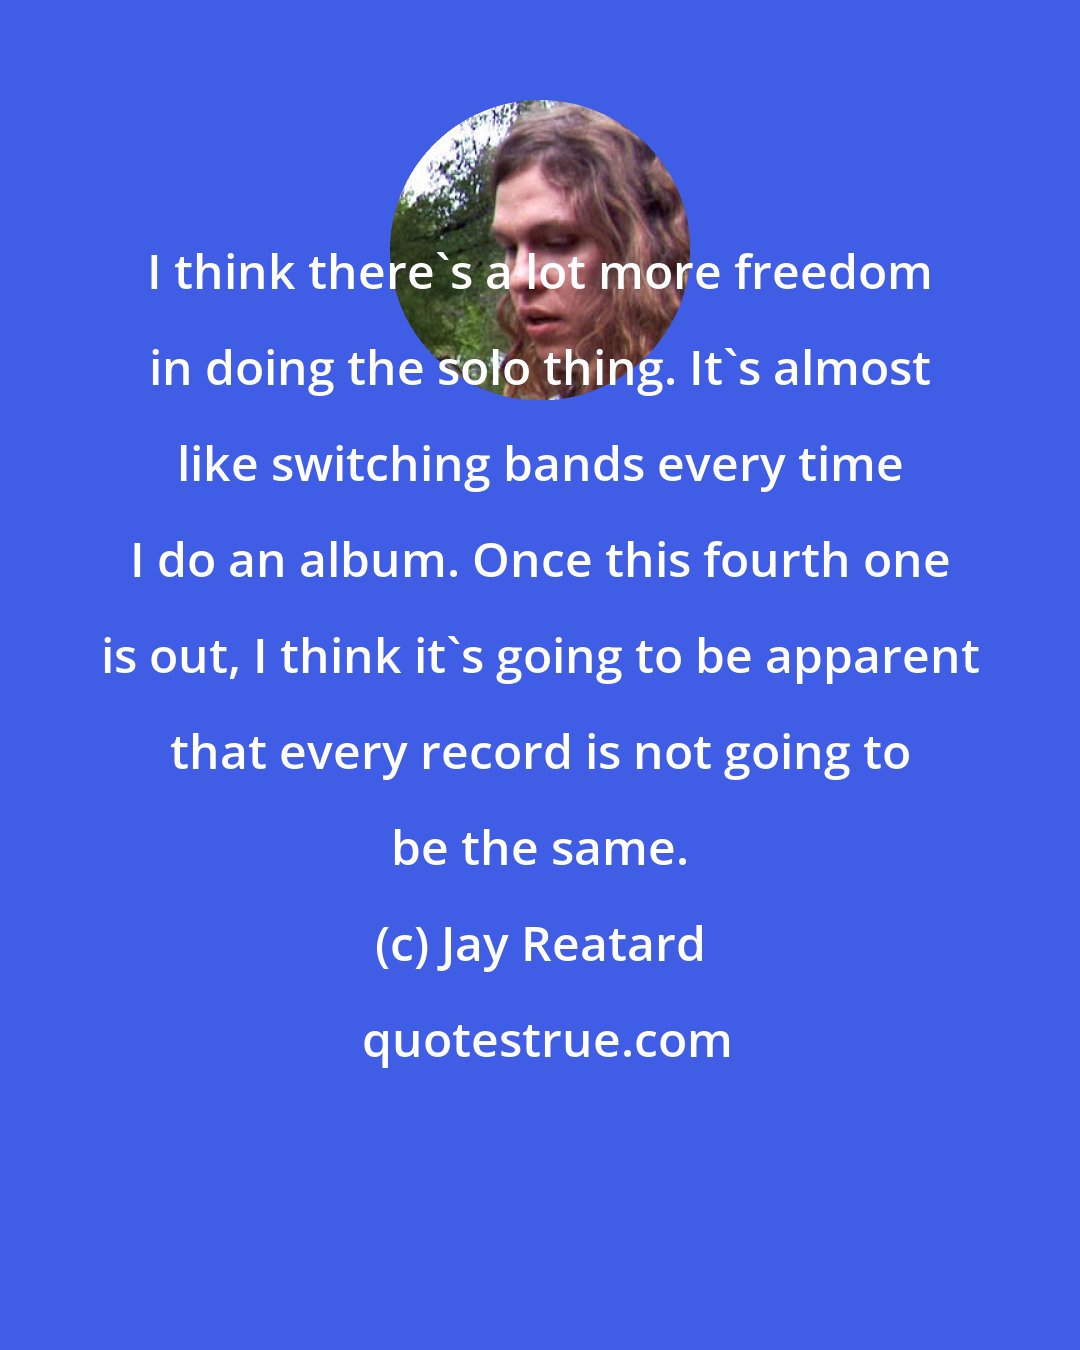 Jay Reatard: I think there's a lot more freedom in doing the solo thing. It's almost like switching bands every time I do an album. Once this fourth one is out, I think it's going to be apparent that every record is not going to be the same.